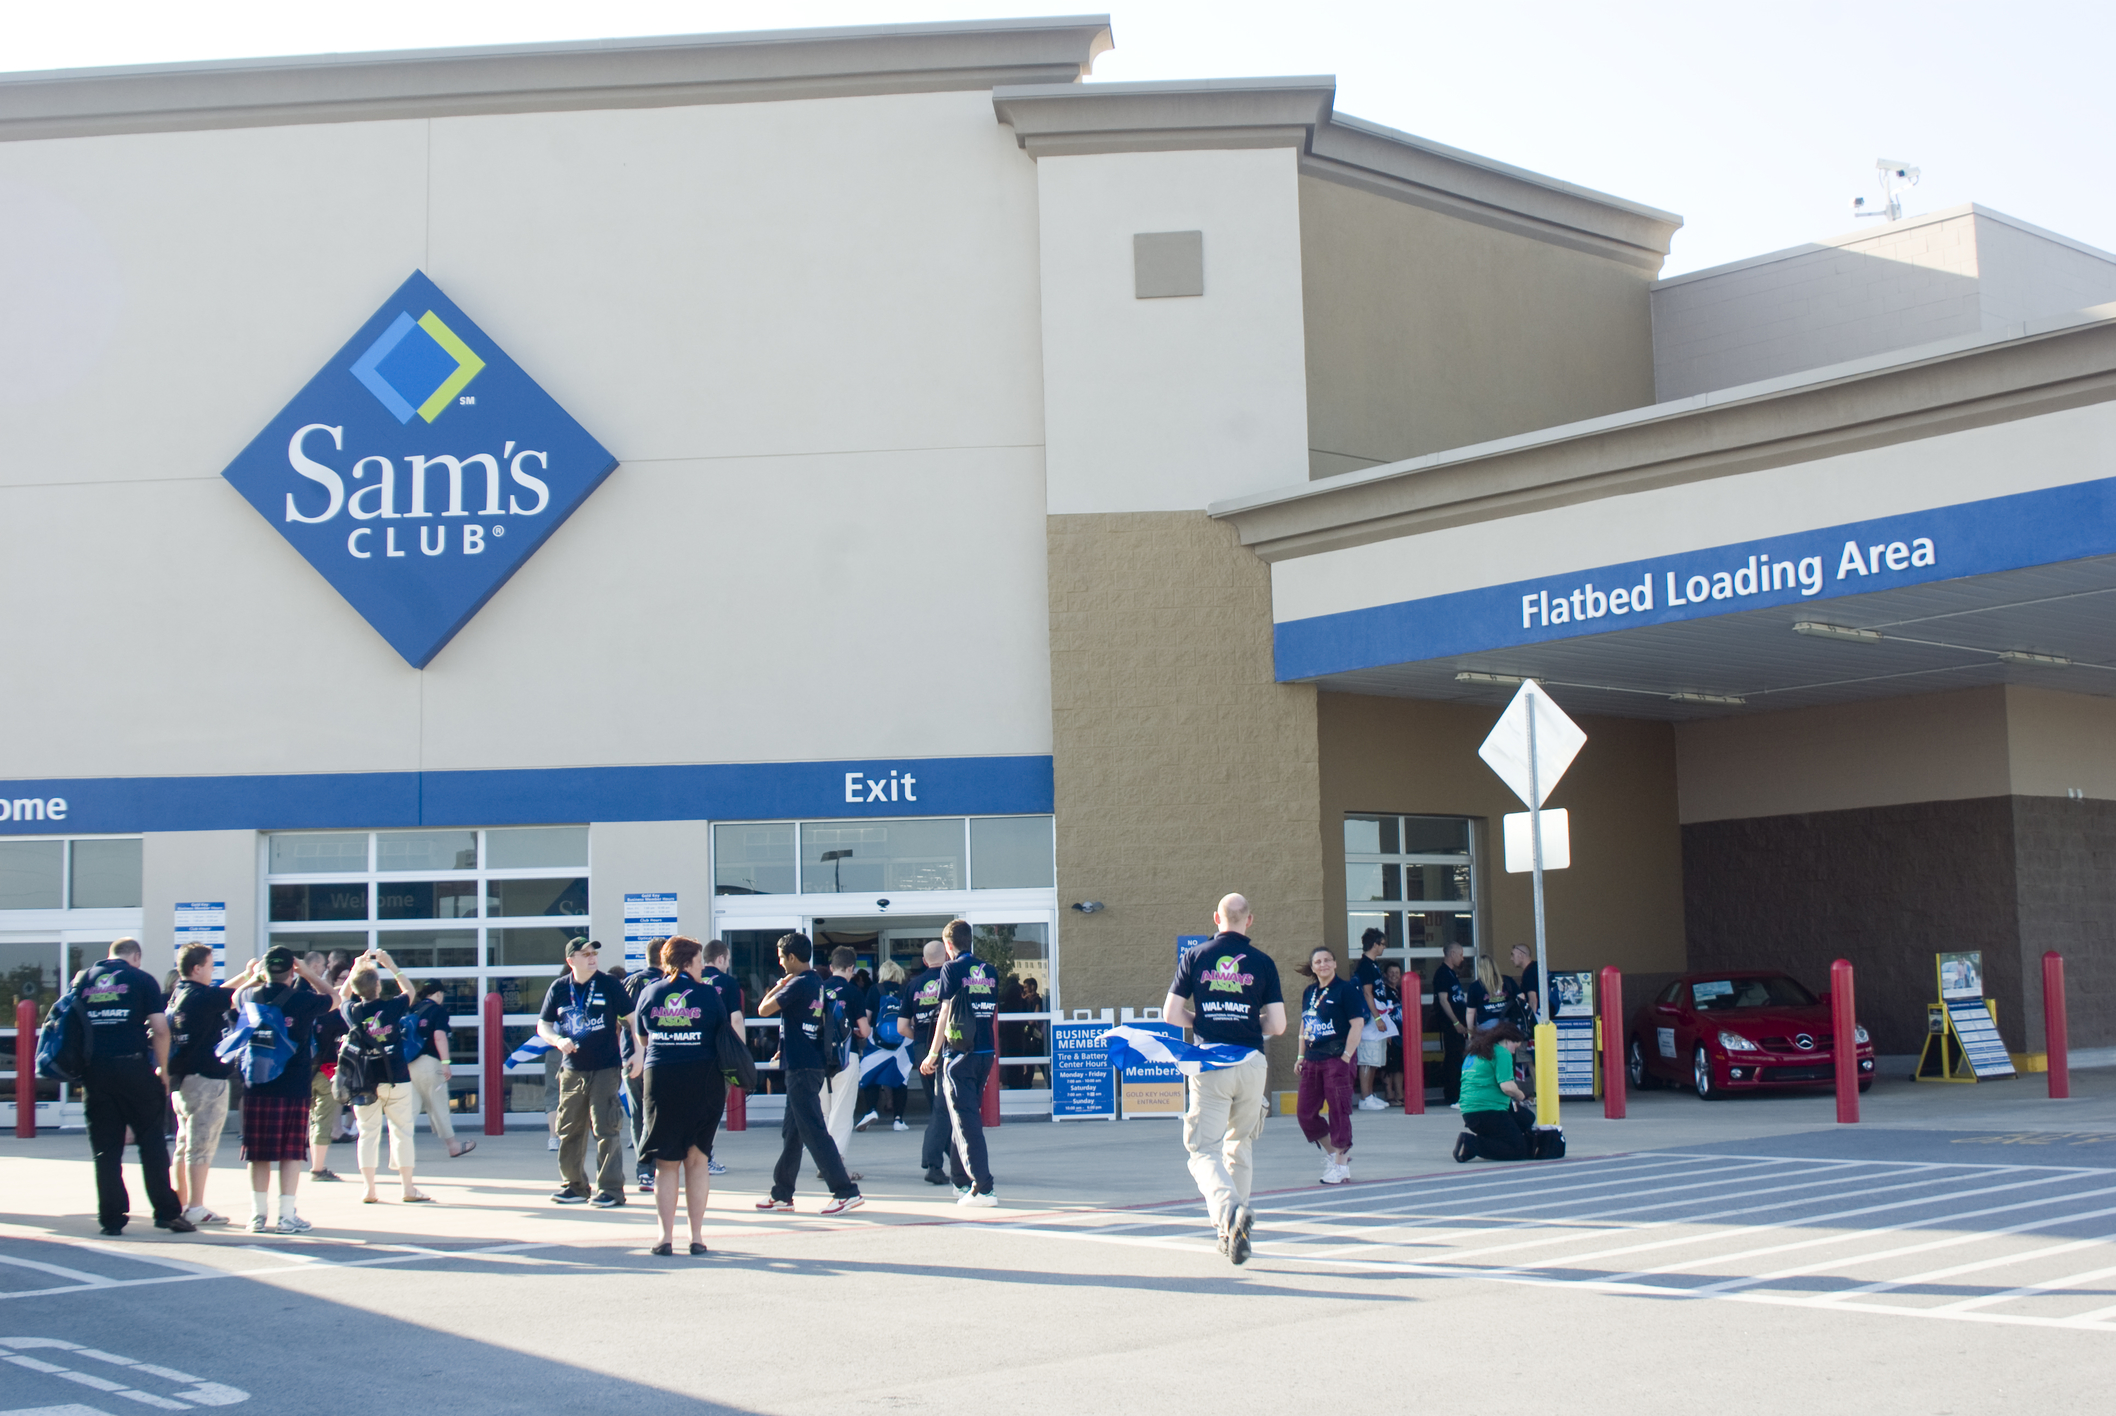 Sam’s Club: Join for $45 and get $45 in freebies including Vudu movie credits and a free gift card!